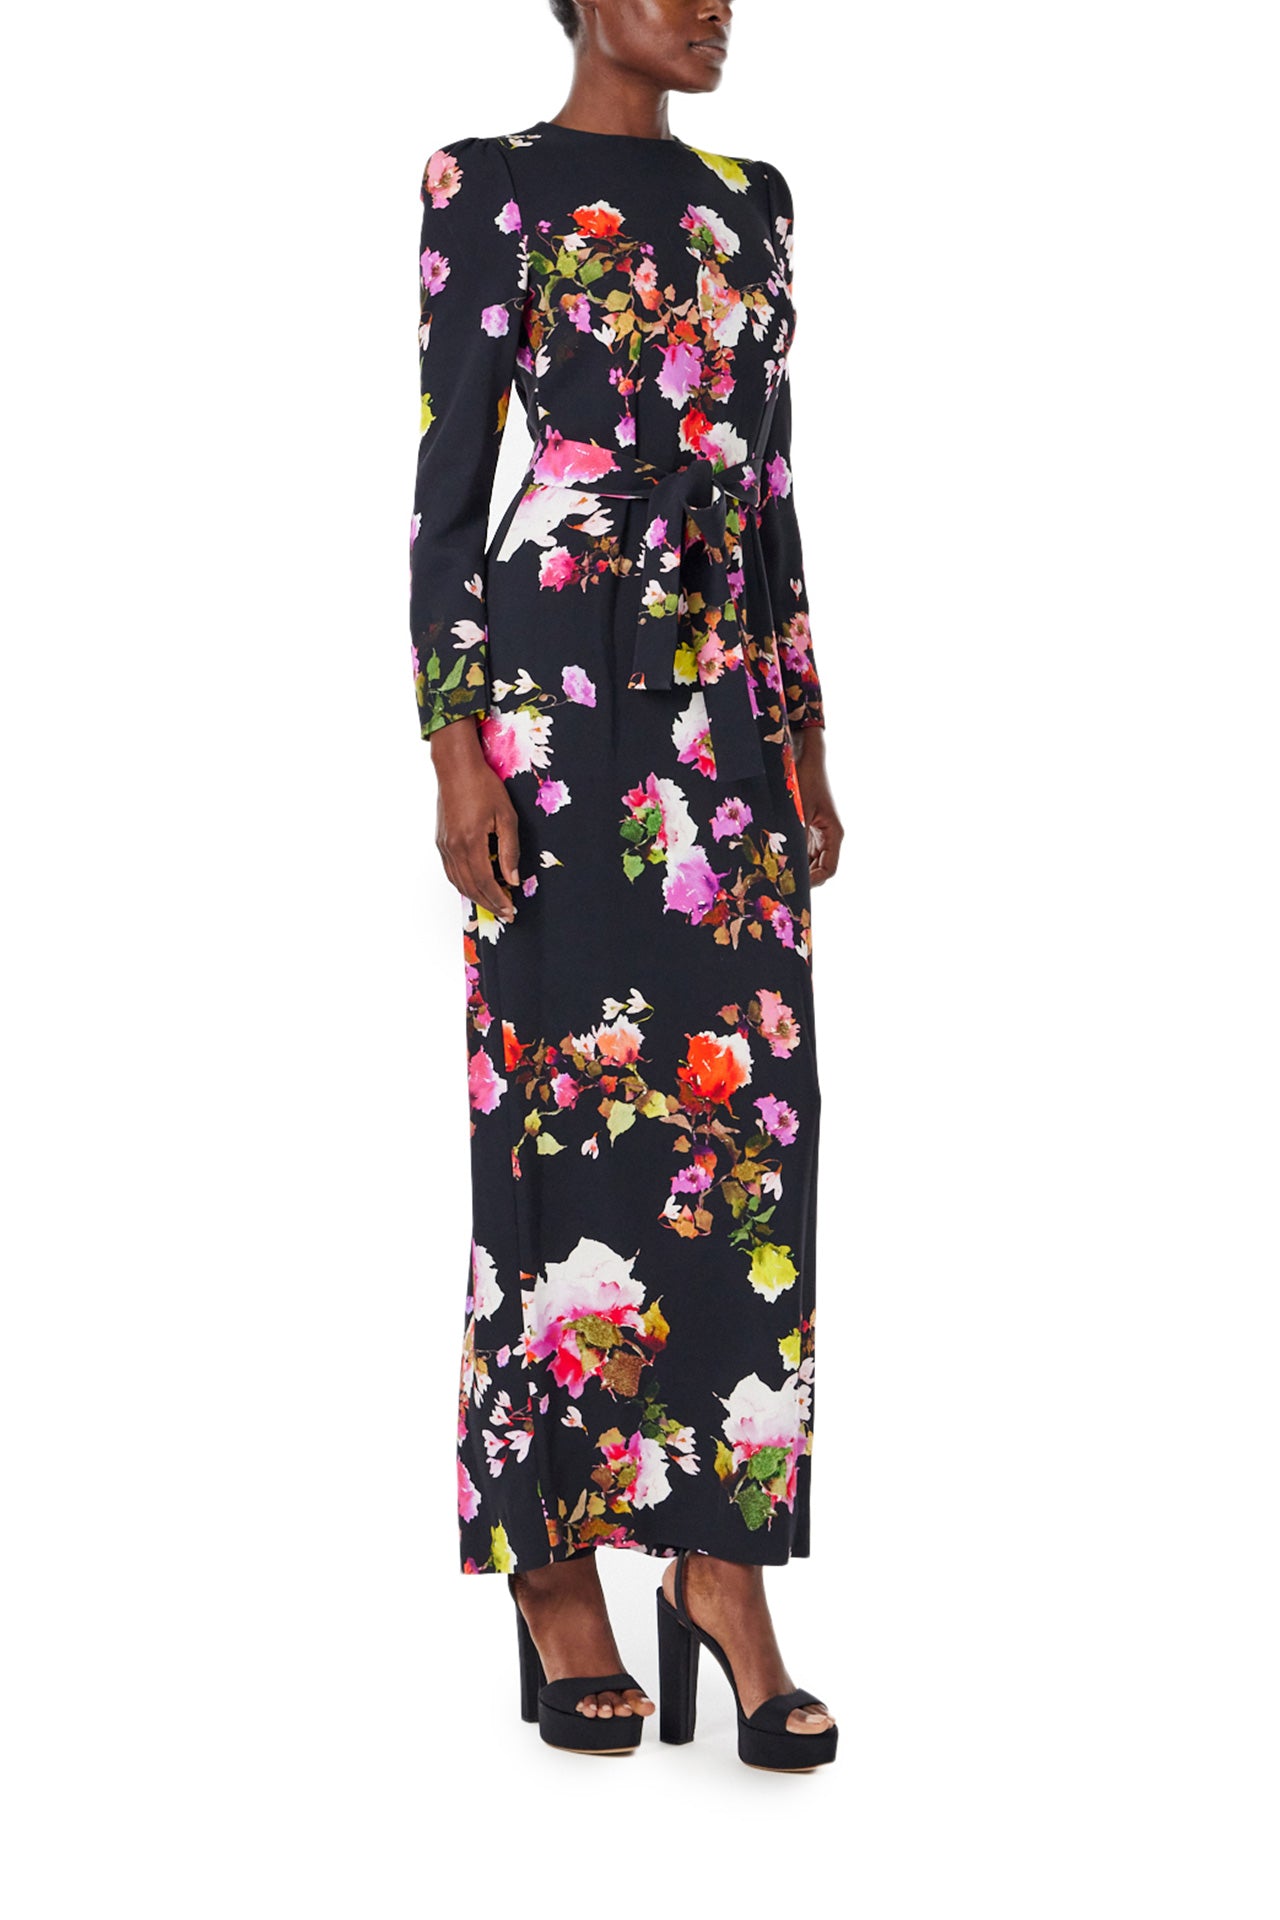 Monique Lhuillier Spring 2024 long sleeve, jewel neck floral print gown with self-tie belt at waist. - right side.